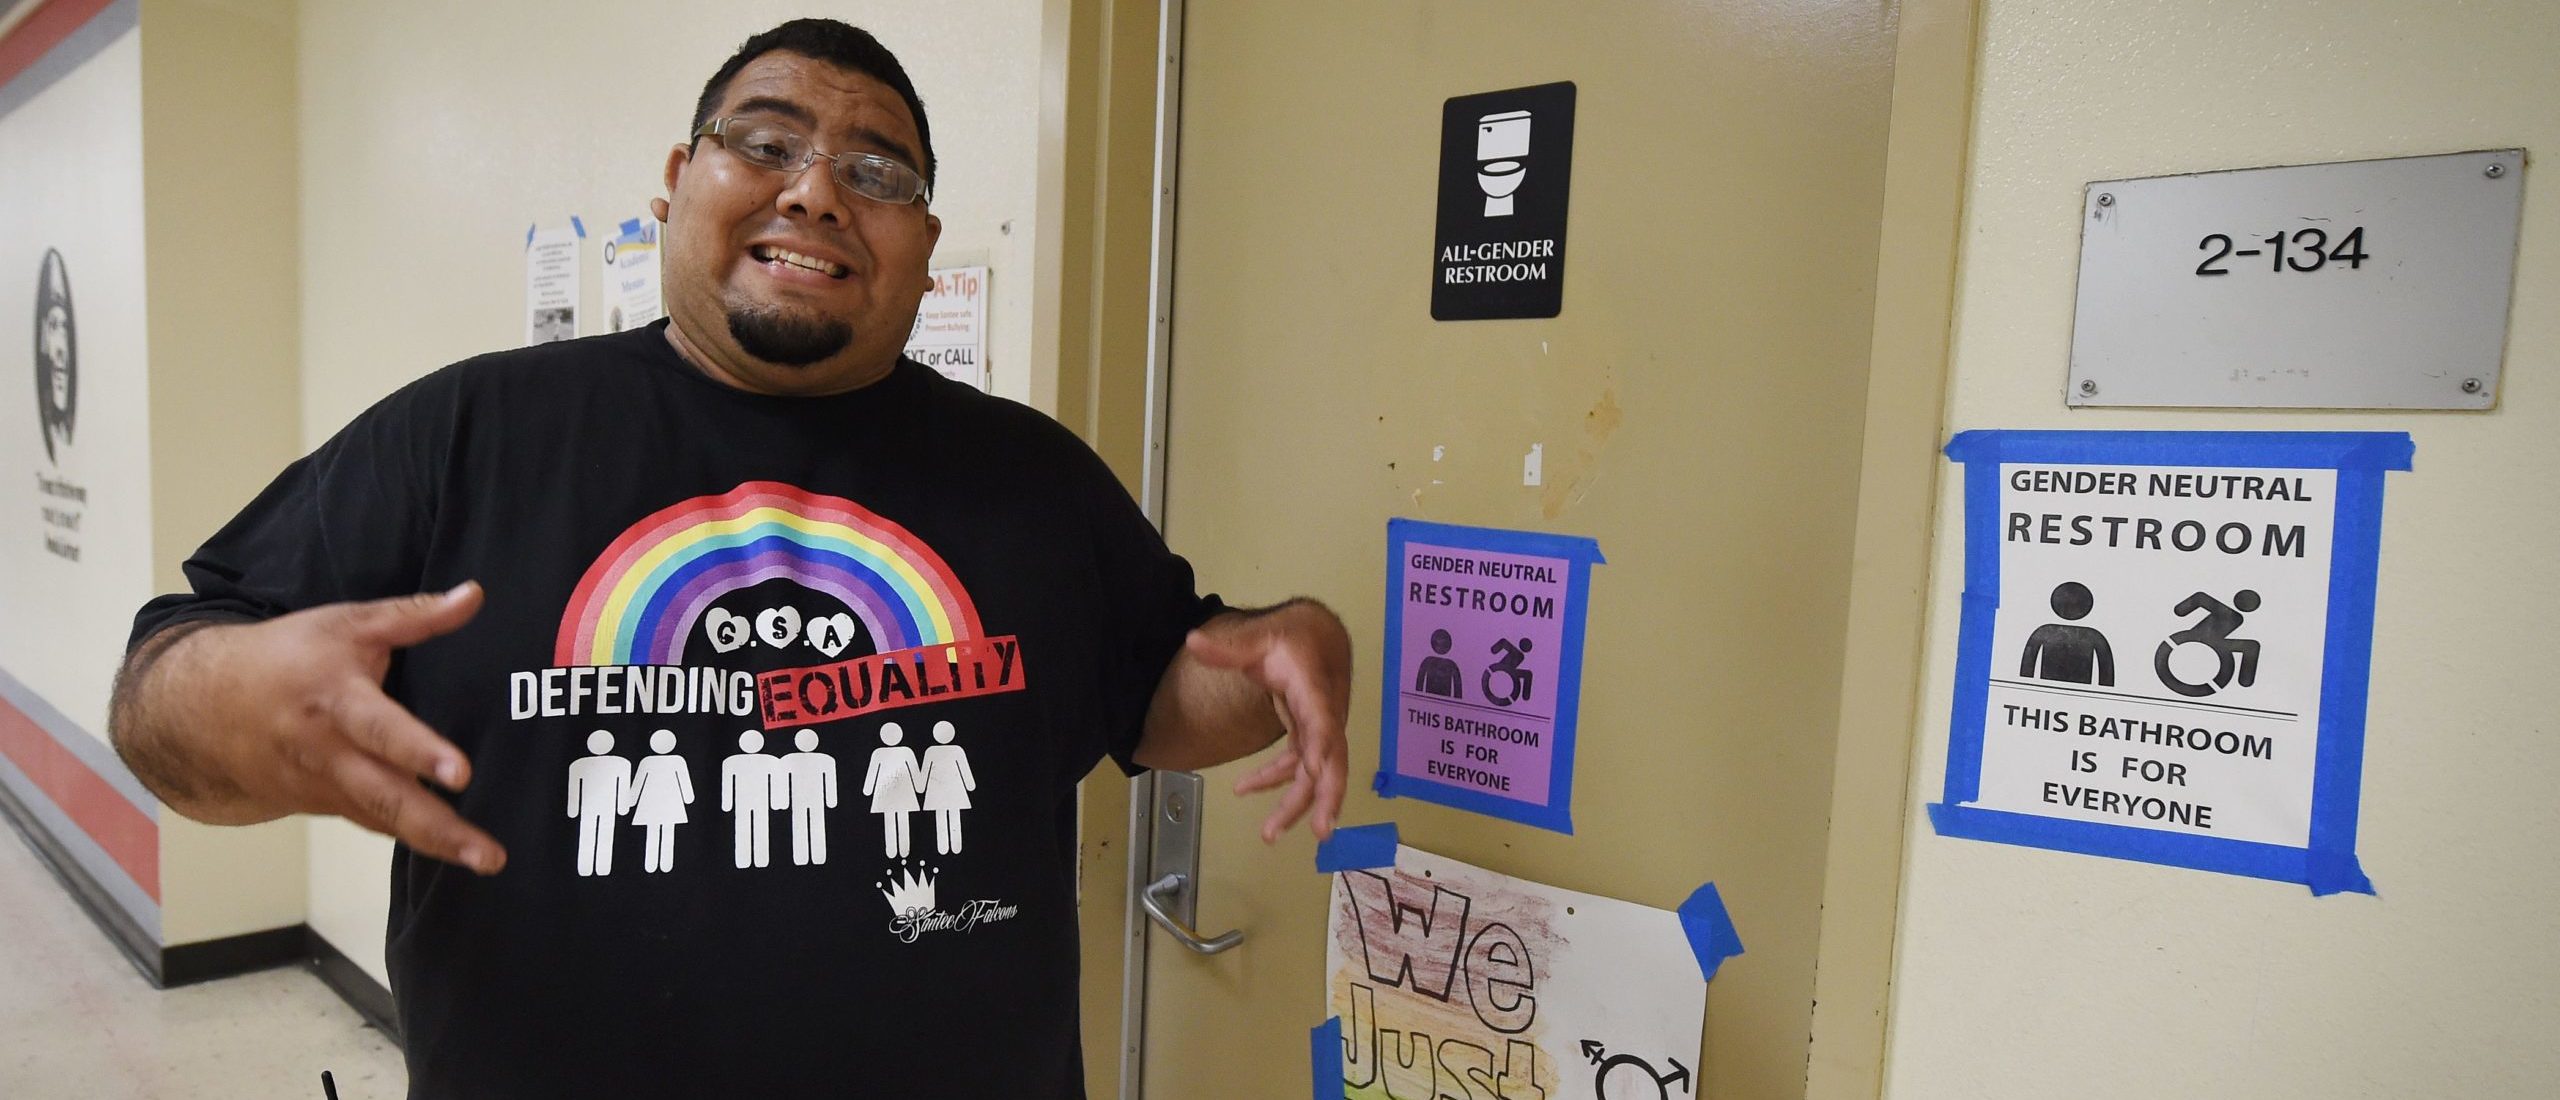 Jose Lara who is the Dean of the Santee High School talks to the press about the transgender issue beside the schools gender neutral restrooms at their campus in Los Angeles, California on May 4, 2016. There is an "emerging consensus worldwide" that the LGBT community should enjoy the same rights as everyone else, Washington's first envoy for gay rights said, but warned transgender people are still too often victims of violence. / AFP / Mark Ralston (Photo credit should read MARK RALSTON/AFP via Getty Images)